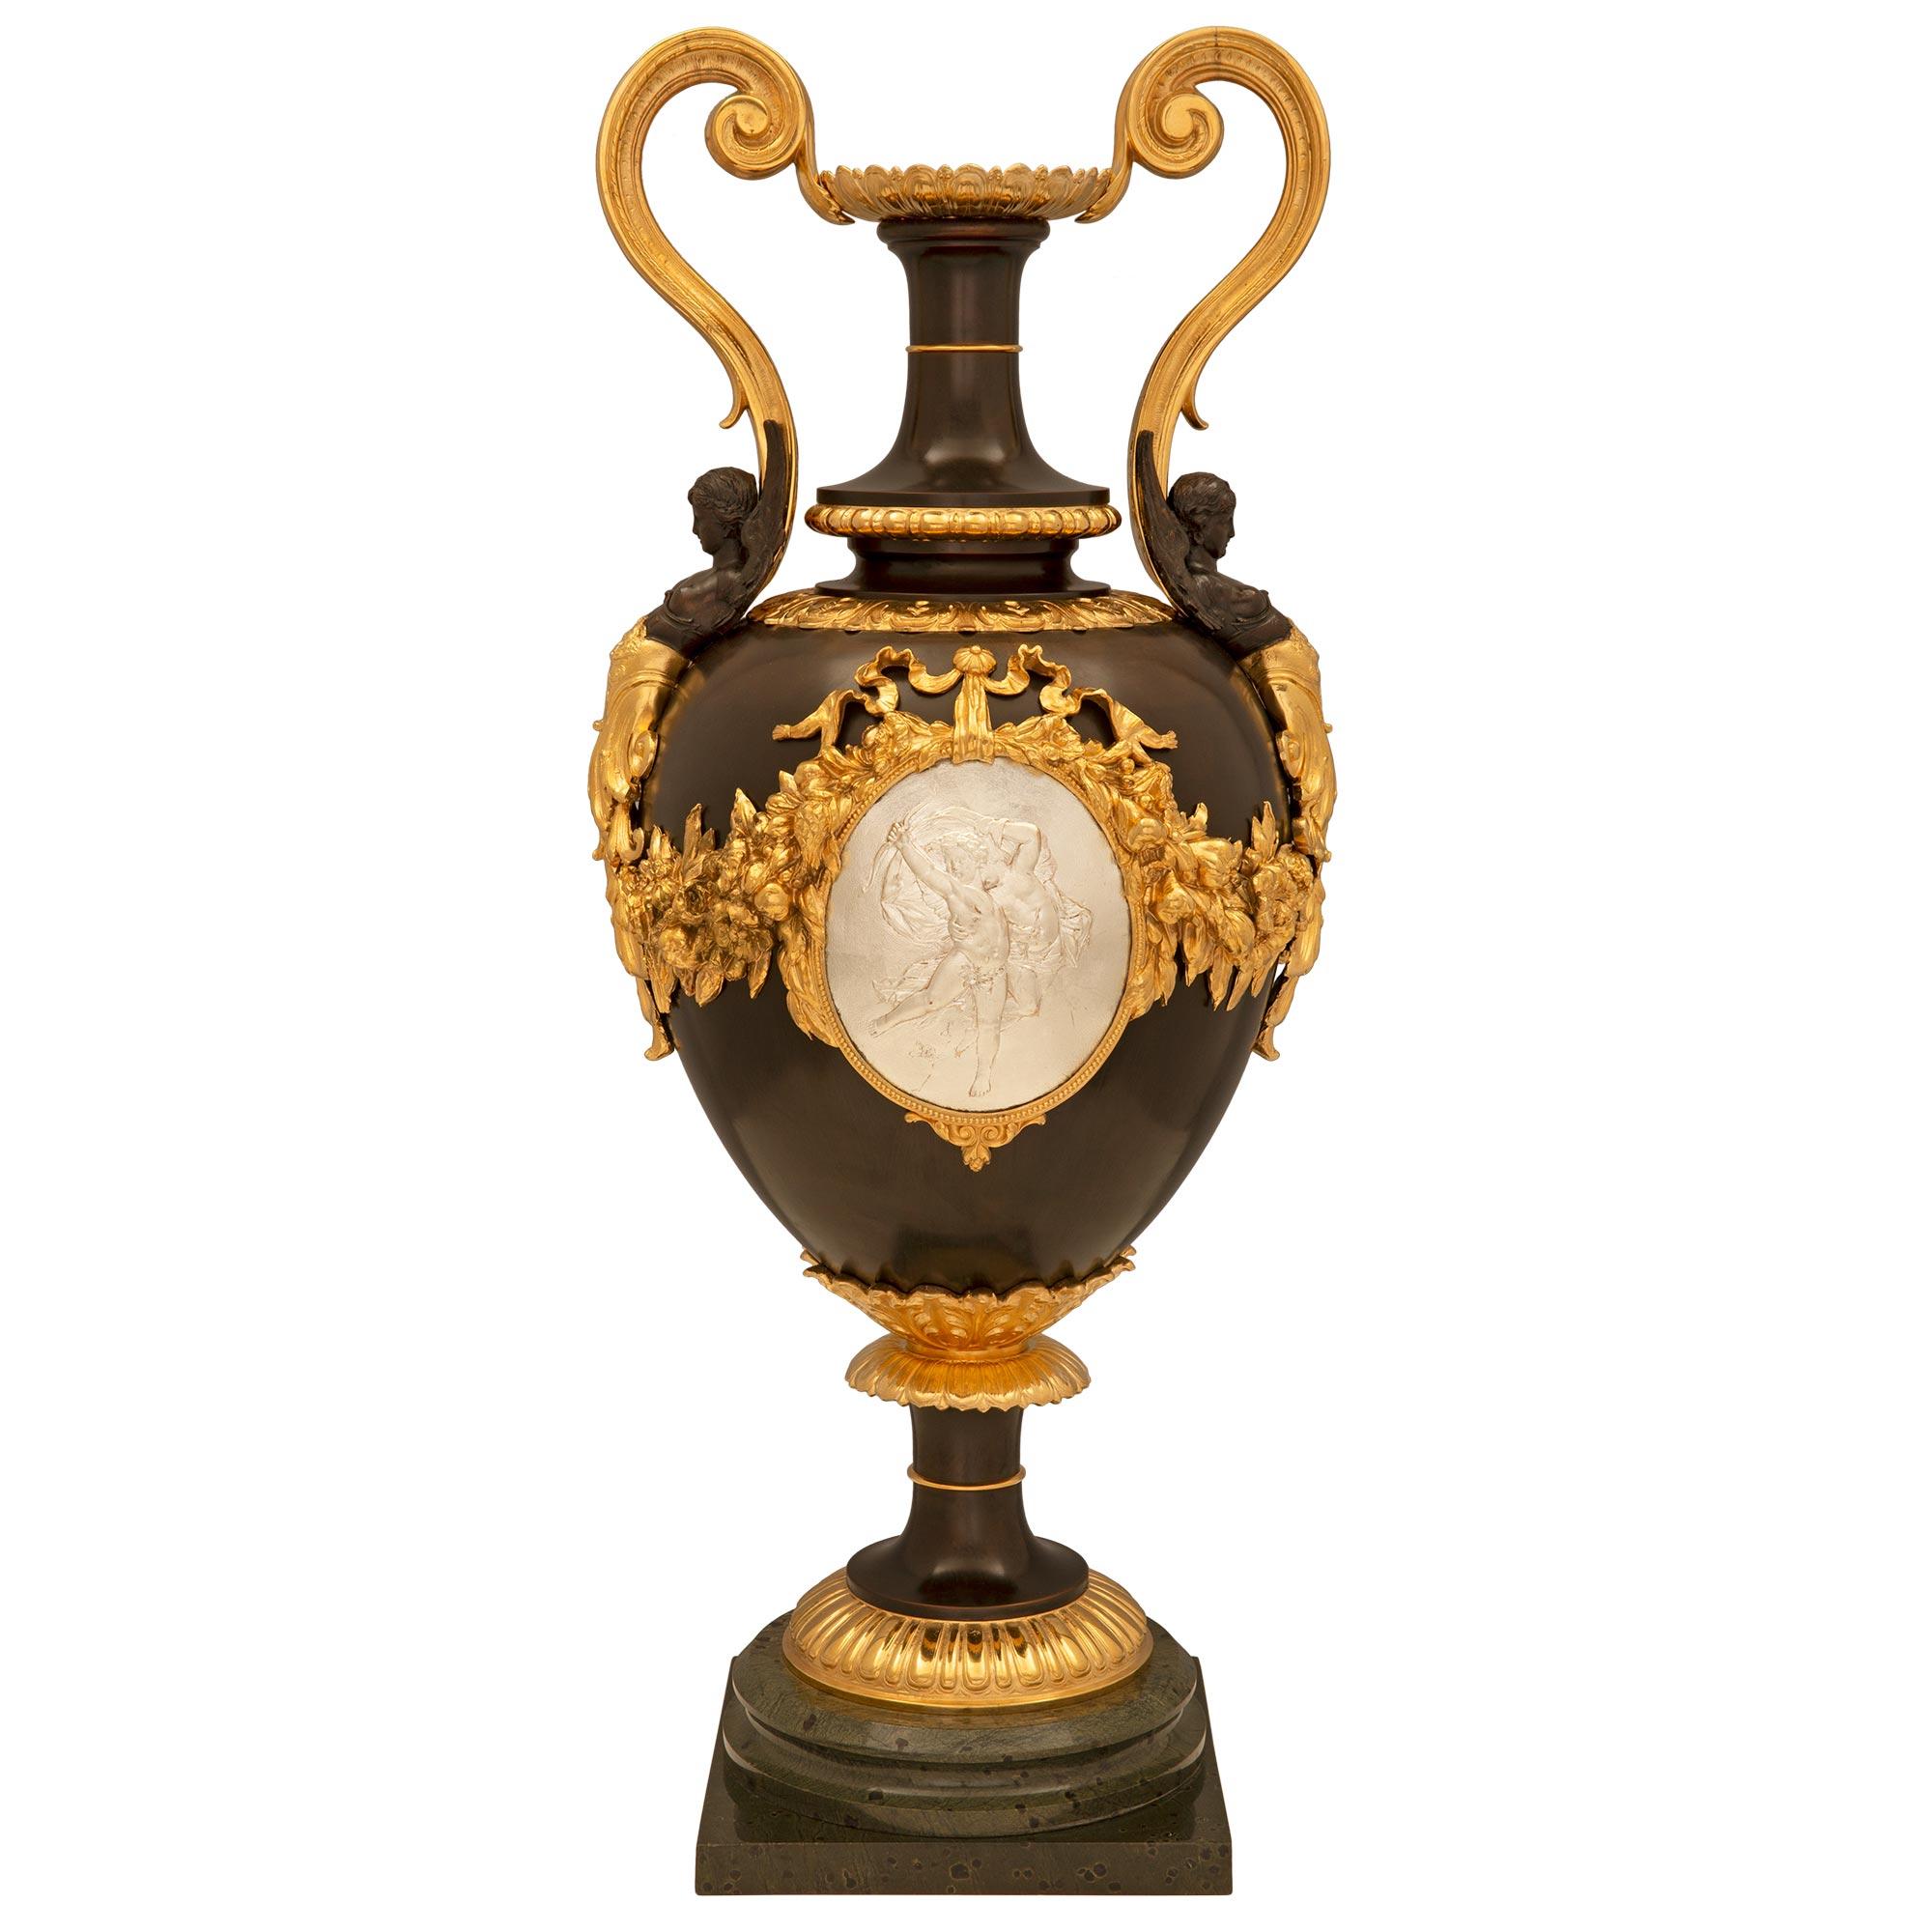 A stunning large scale French 19th century Louis XVI st. Belle Époque period patinated bronze, silvered bronze and ormolu urn. The urn is raised by a square base below a fine circular mottled wrap around band and a reeded ormolu band at the socle